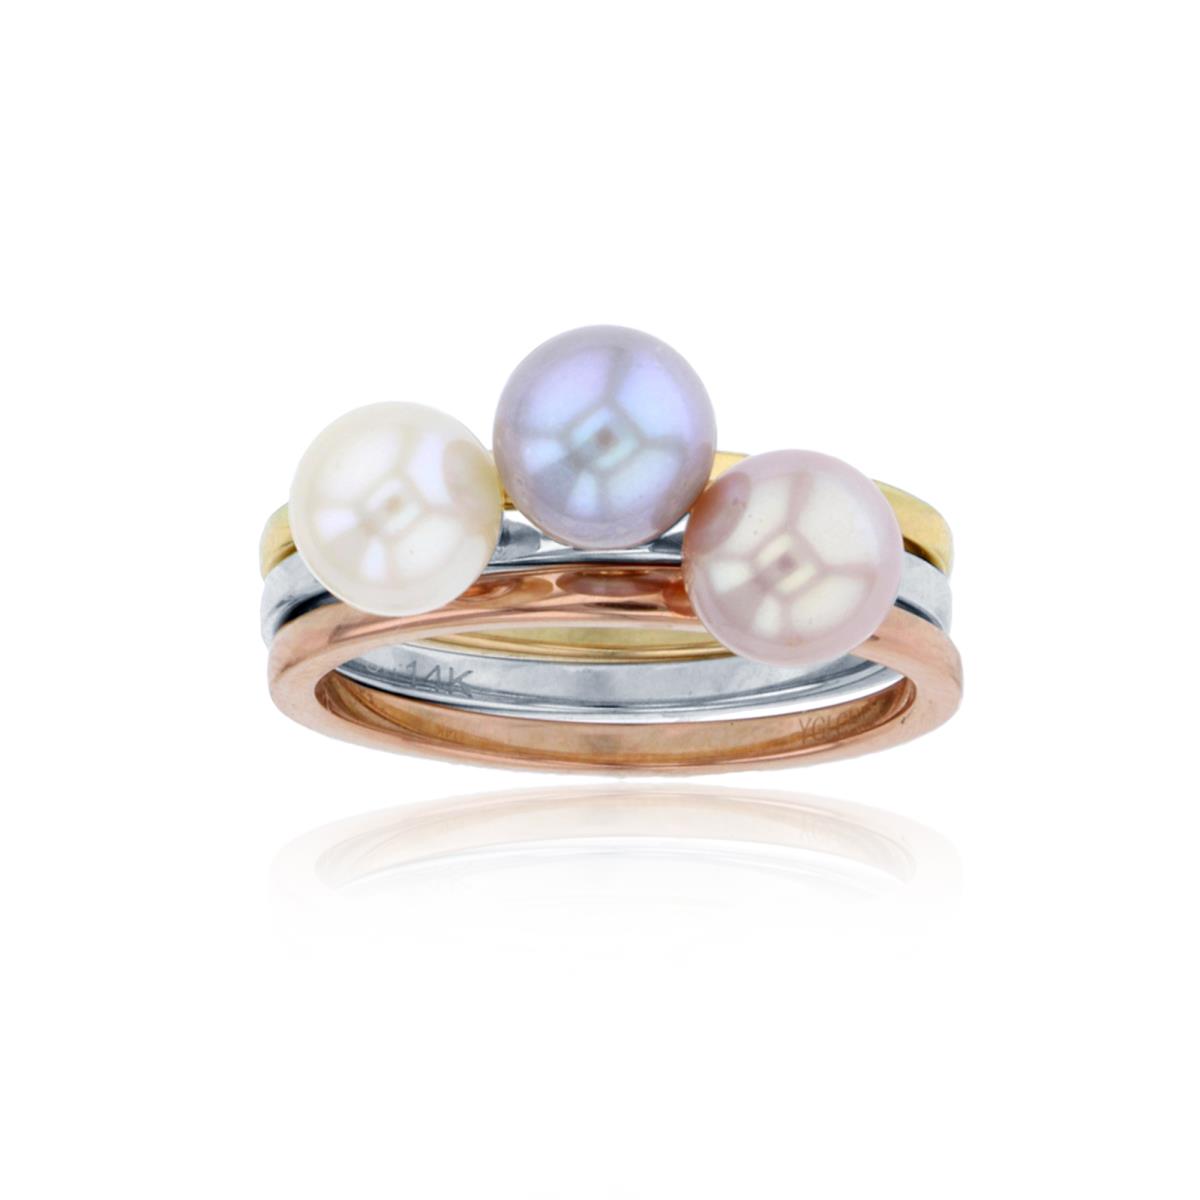 10K Tricolor Gold 6mm Rnd White/Pink/Silver Pearl 3-Rings Set